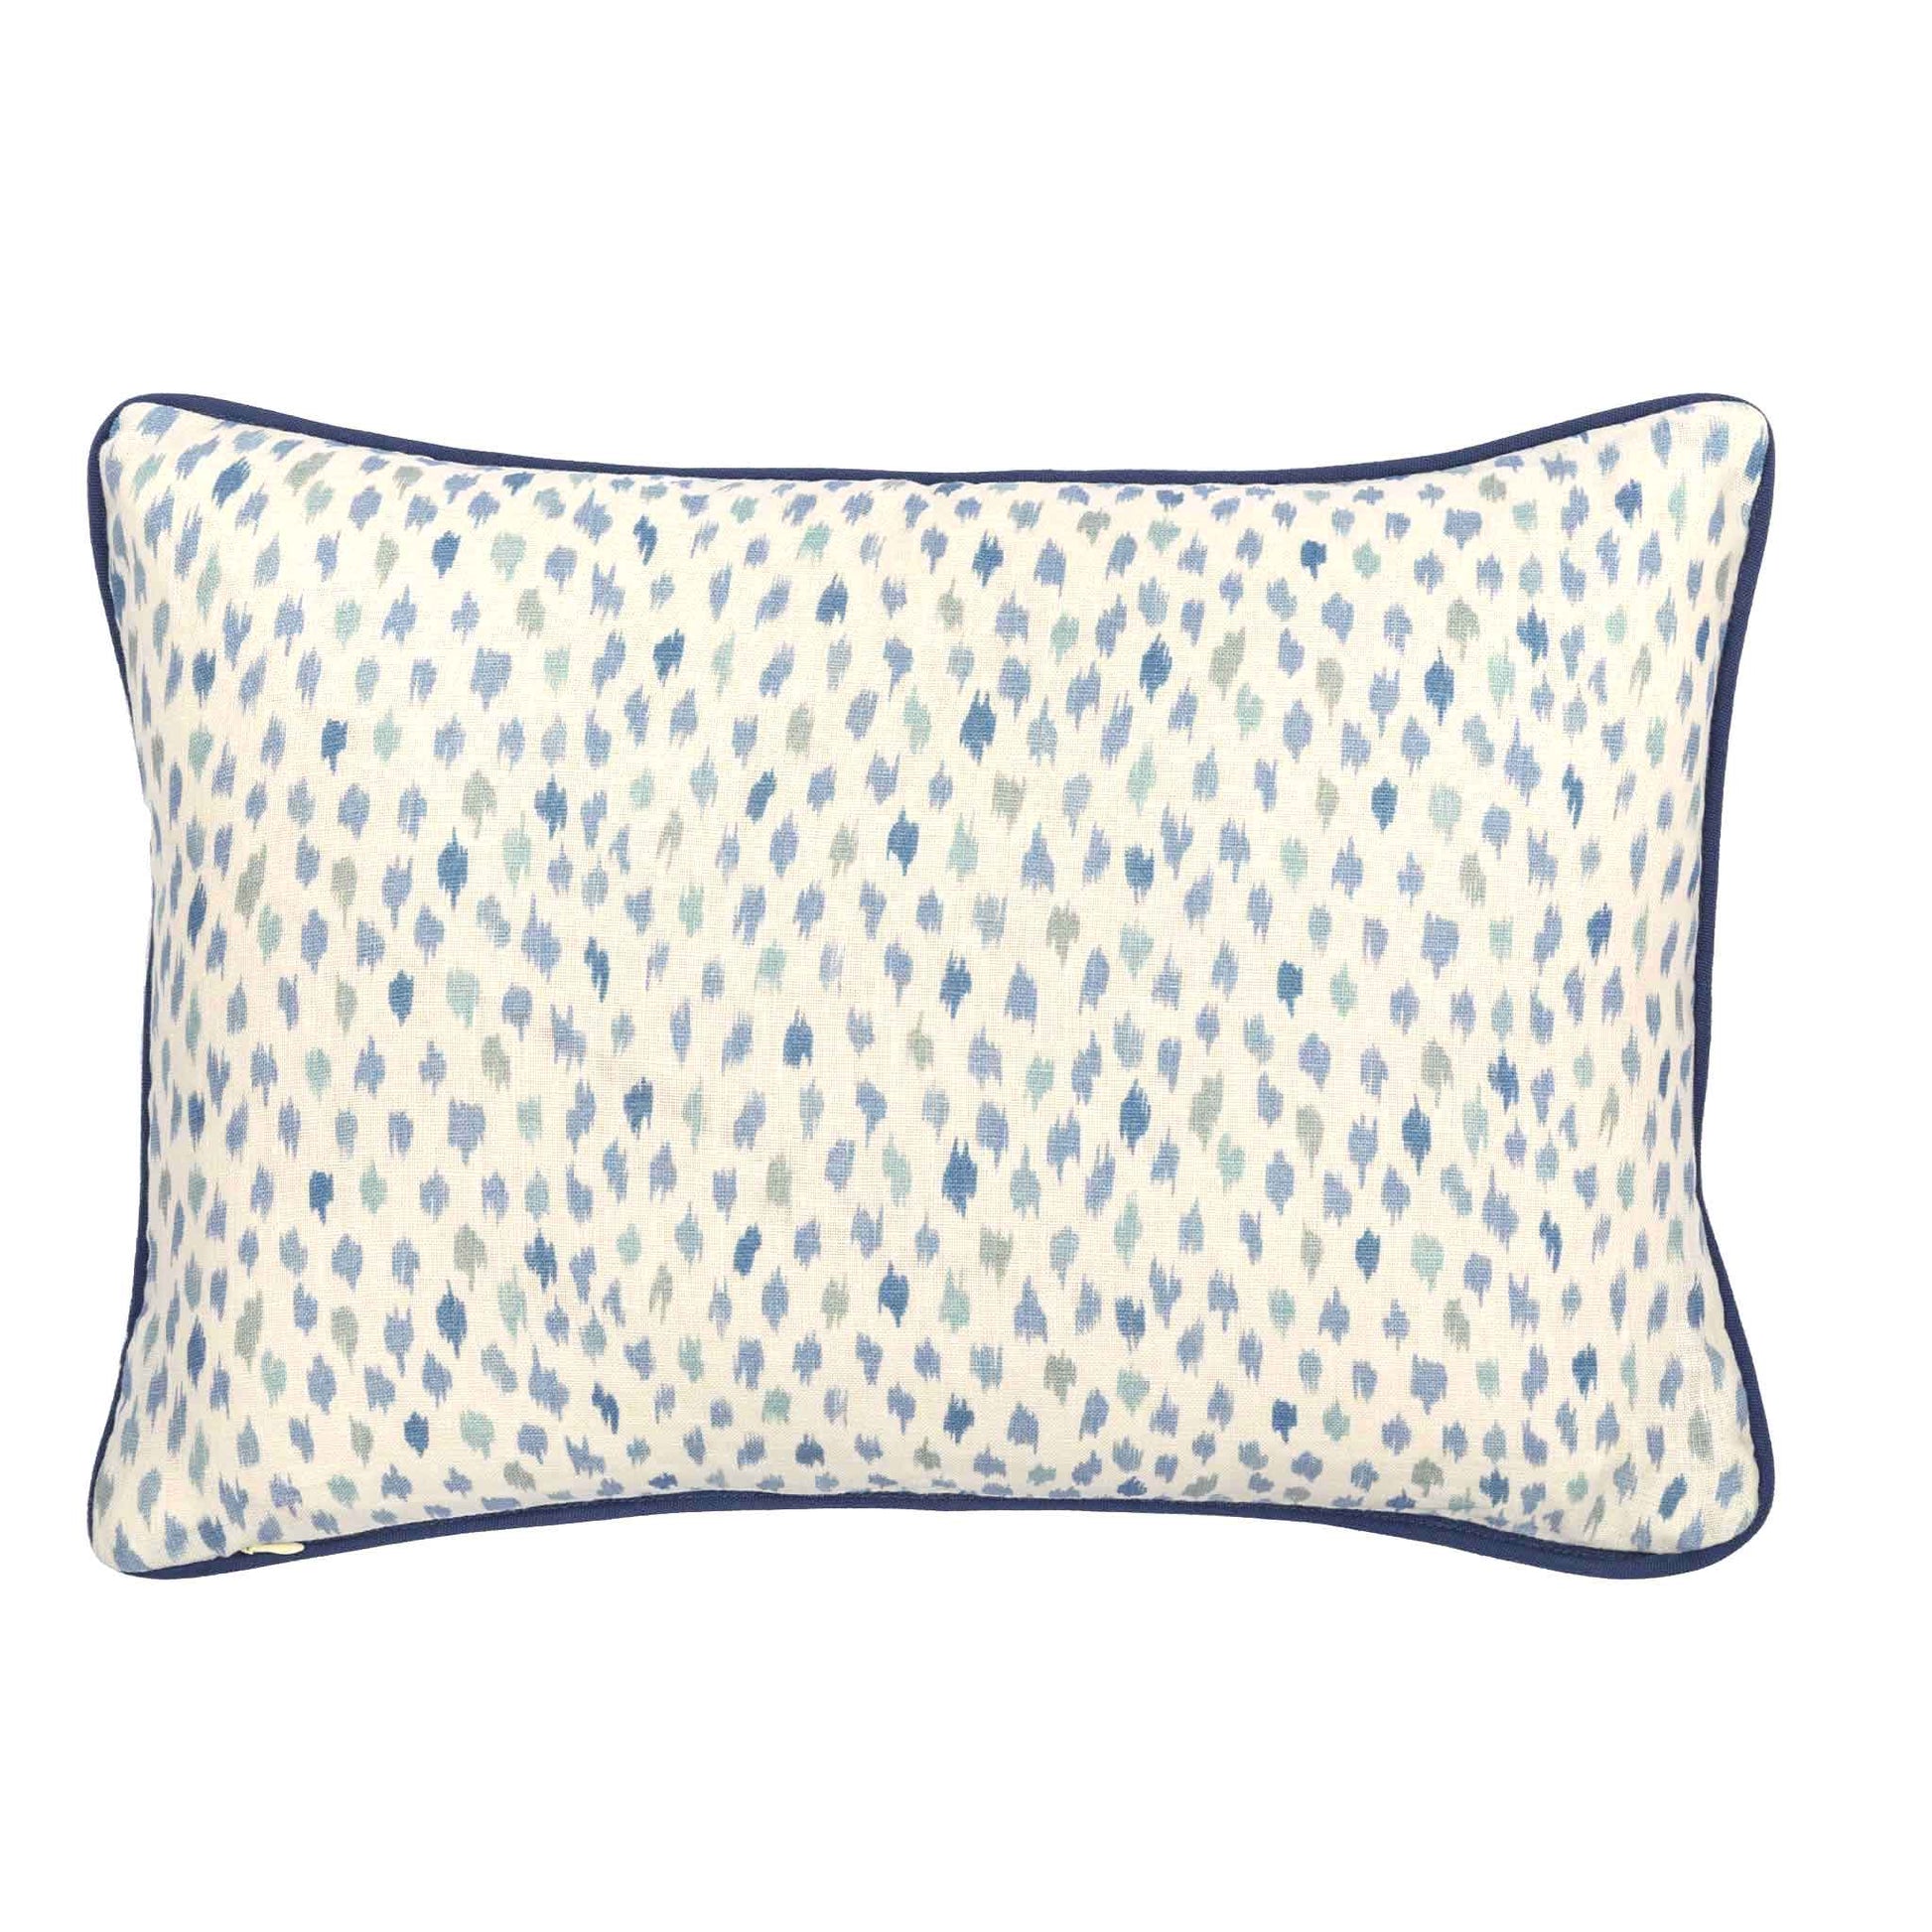 dotted patterned cushion blue trim